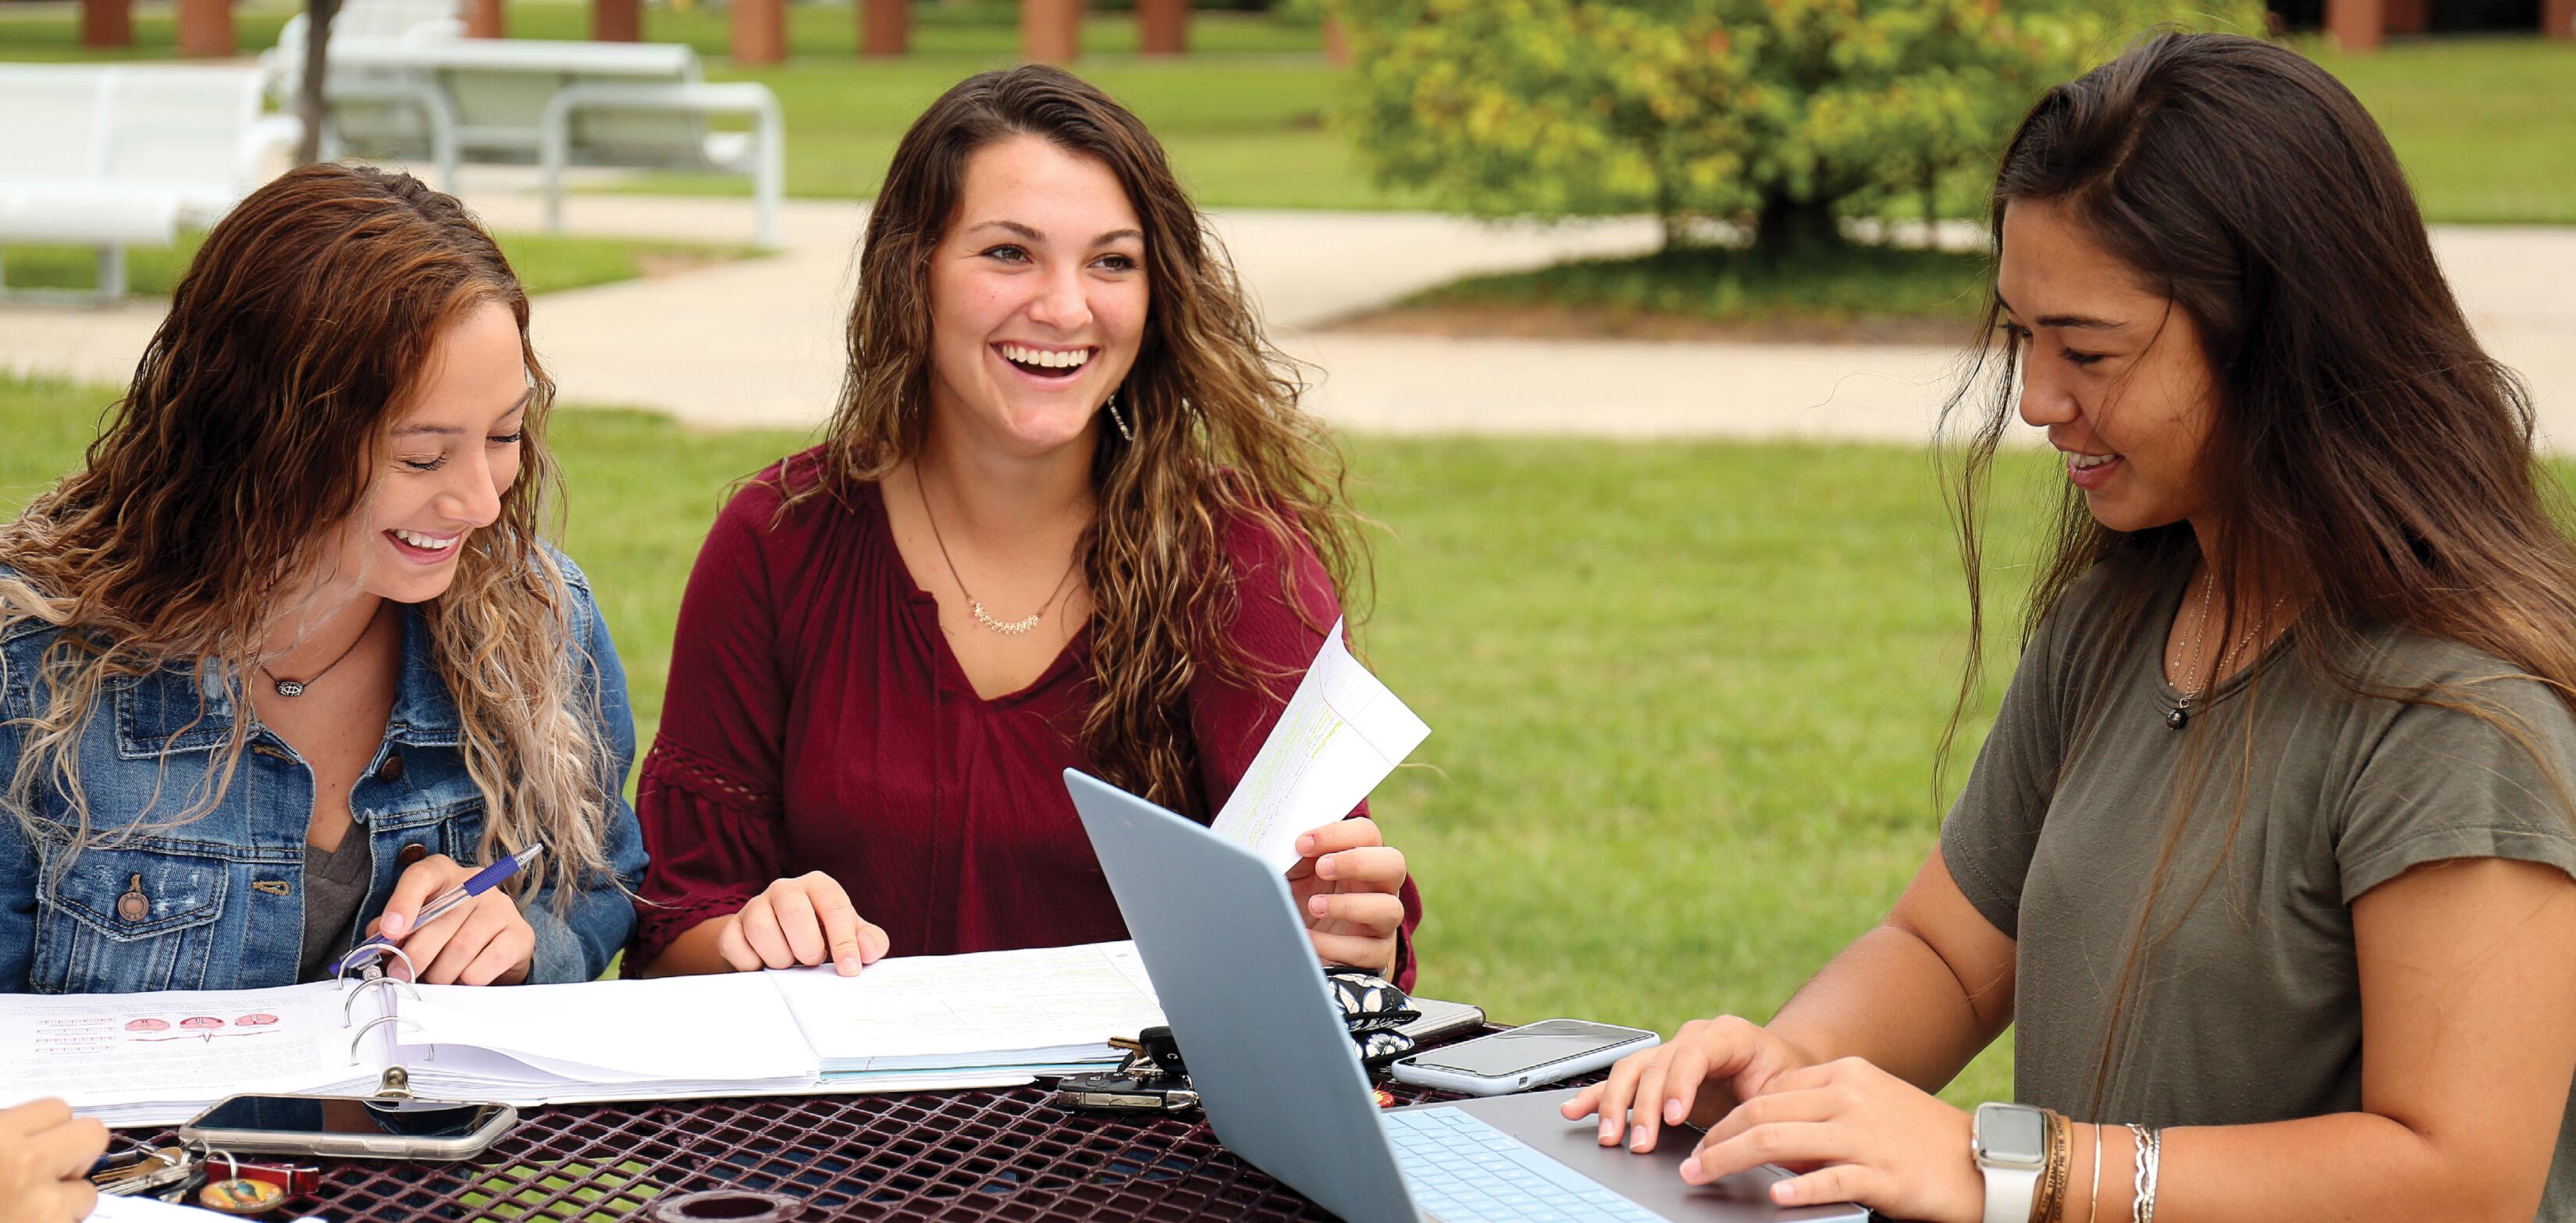 Students studying in the quad